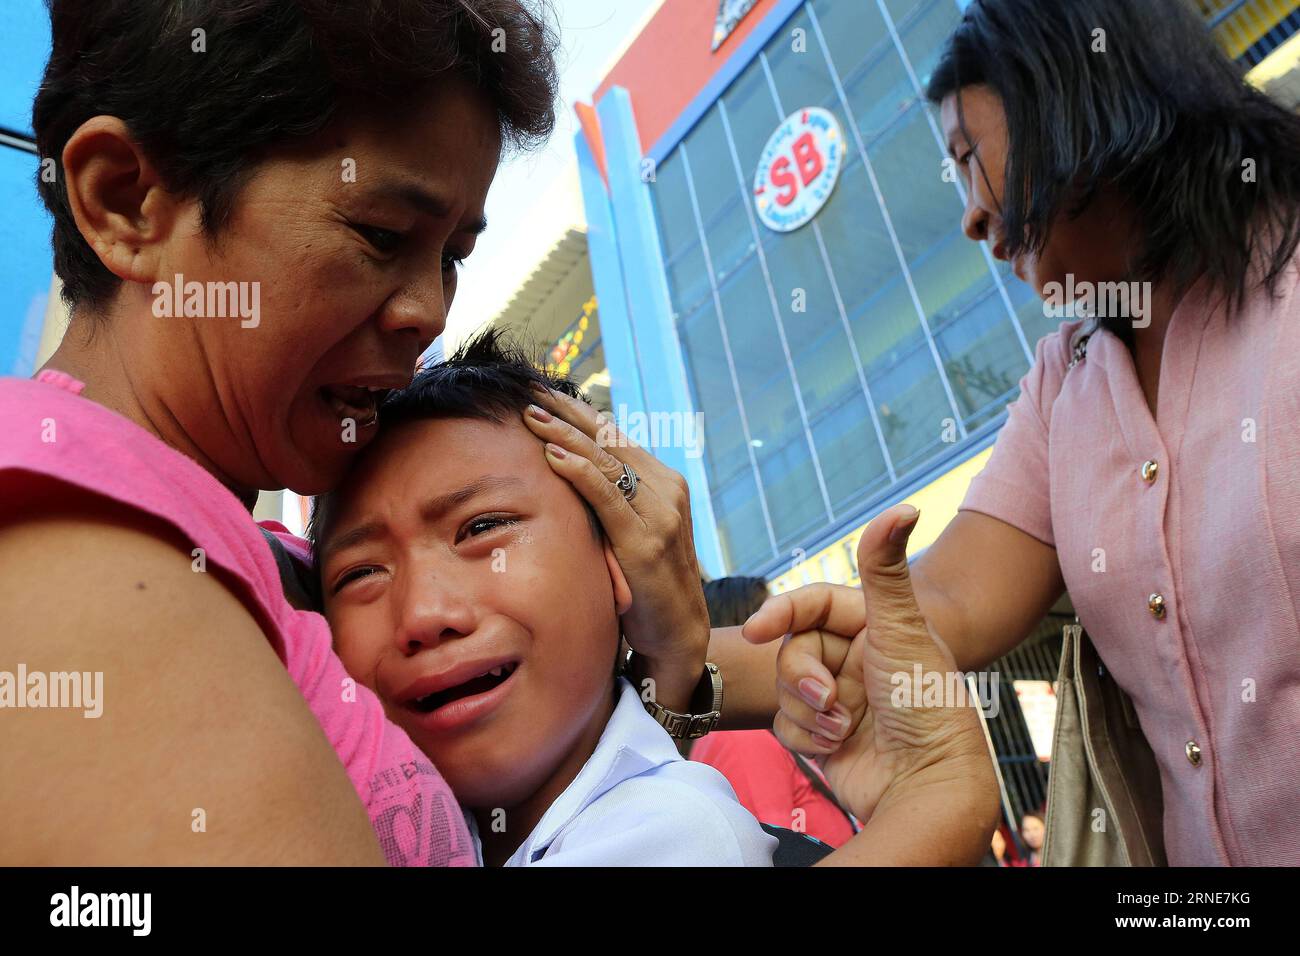 (160613) -- QUEZON CITY (THE PHILIPPINES), June 13, 2016 -- A student cries during the first day of school at the President Corazon Aquino Elementary School in Quezon City, the Philippines, on June 13, 2016. Around 25 million students attended elementary and high school classes all over the country at the beginning of the school year 2016-2017, according to the Philippine Department of Education. ) THE PHILIPPINES-QUEZON CITY-FIRST DAY OF SCHOOL RouellexUmali PUBLICATIONxNOTxINxCHN   160613 Quezon City The Philippines June 13 2016 a Student cries during The First Day of School AT The President Stock Photo